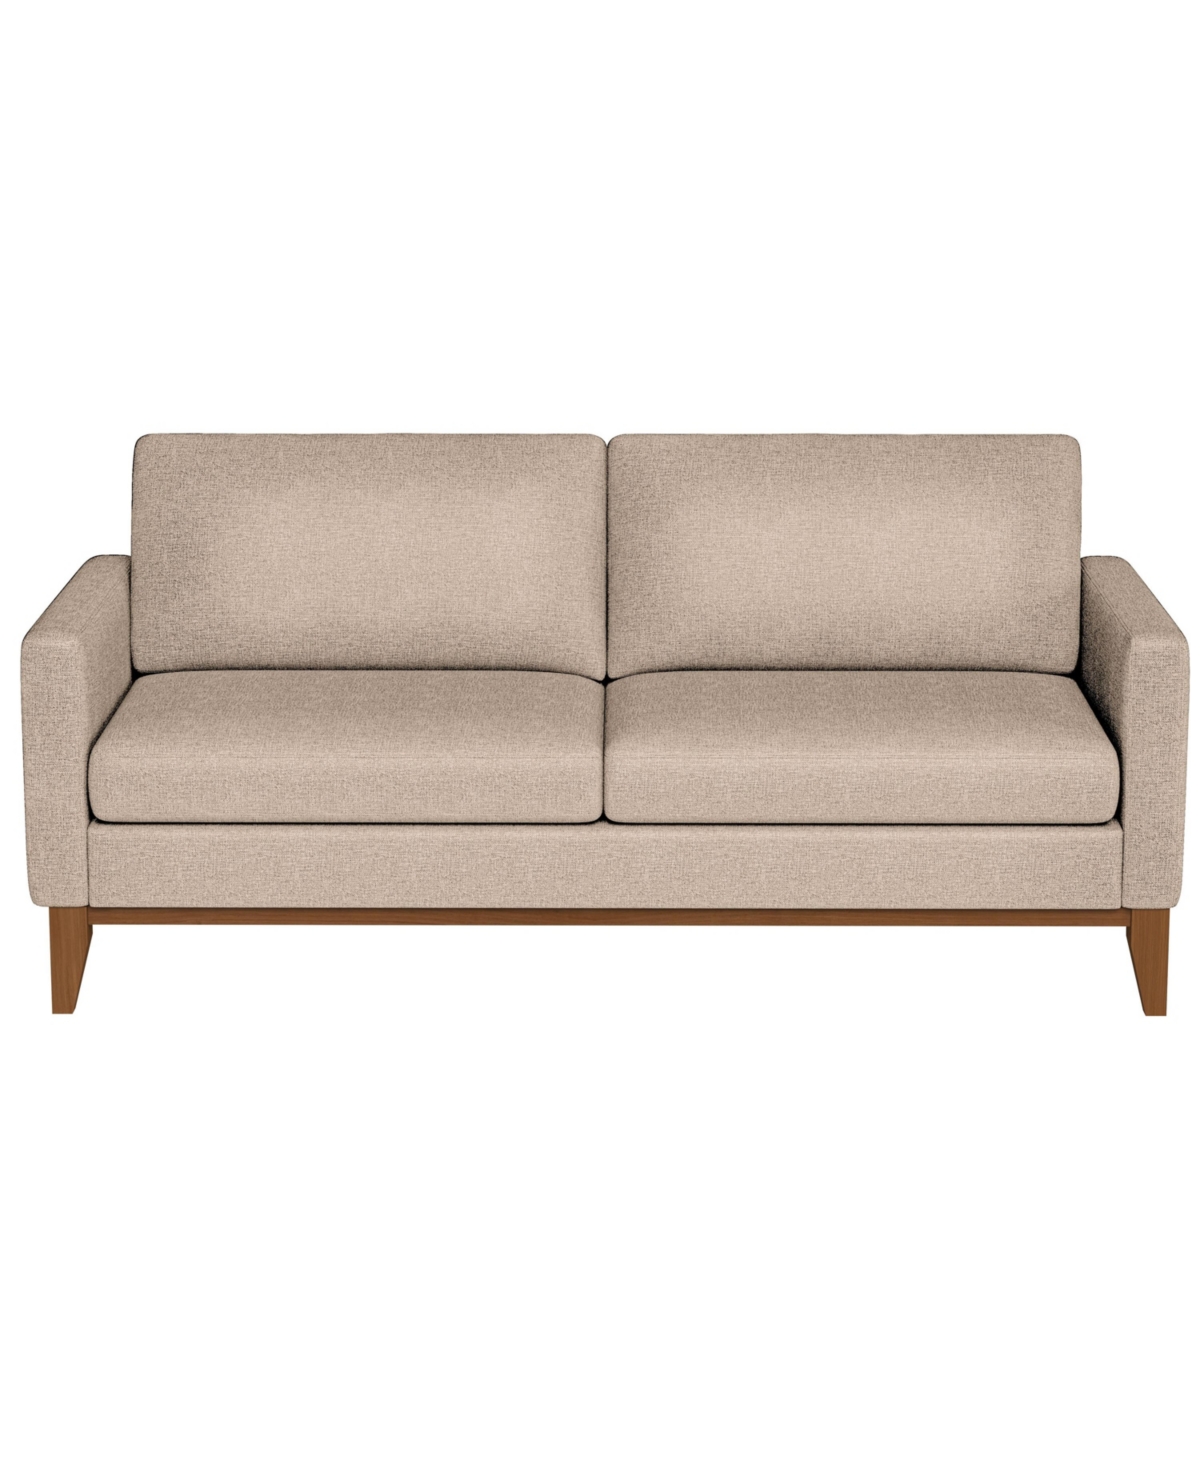 Lifestyle Solutions Tory Sofa In Beige